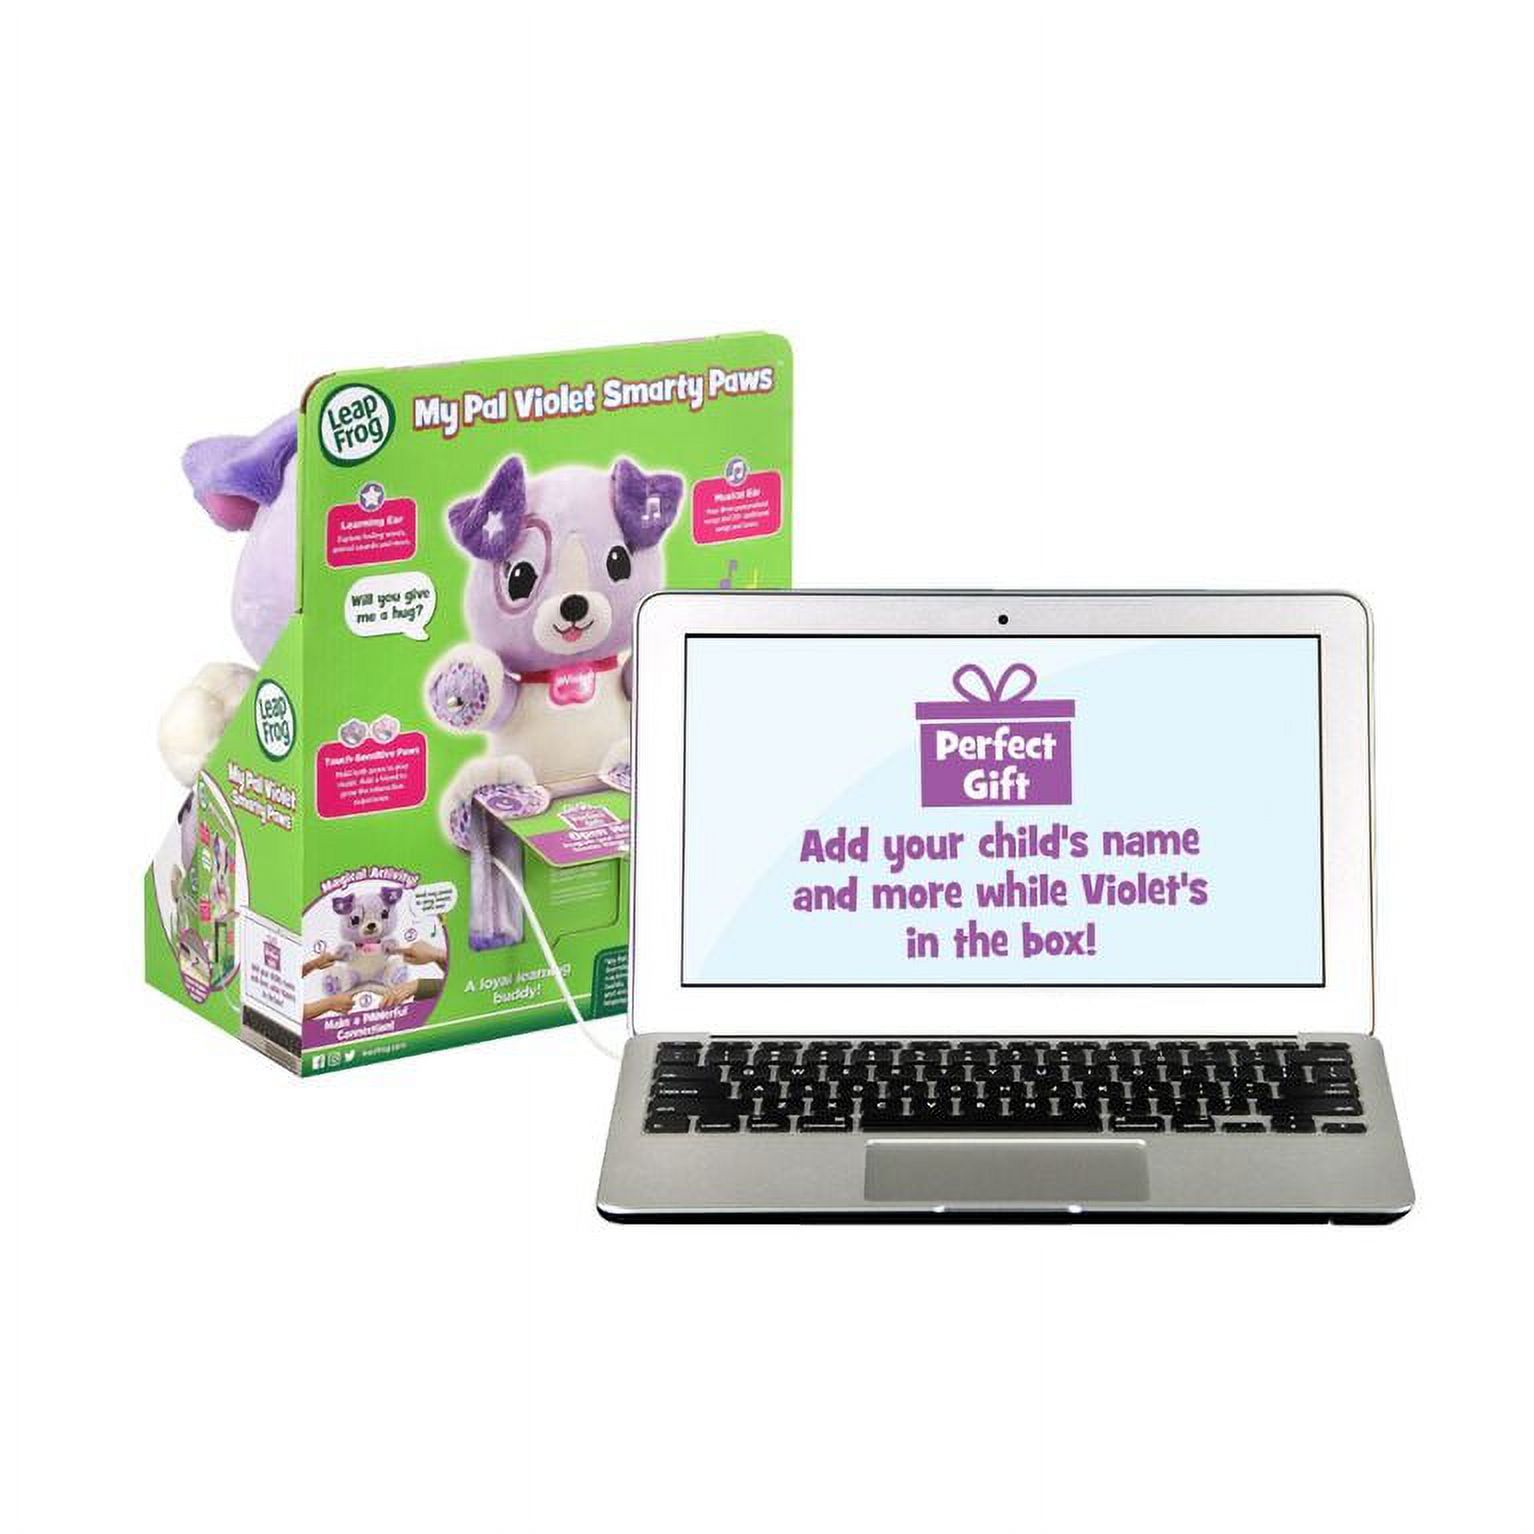 LeapFrog: My pal Violet smarty paws (English version) - image 3 of 6